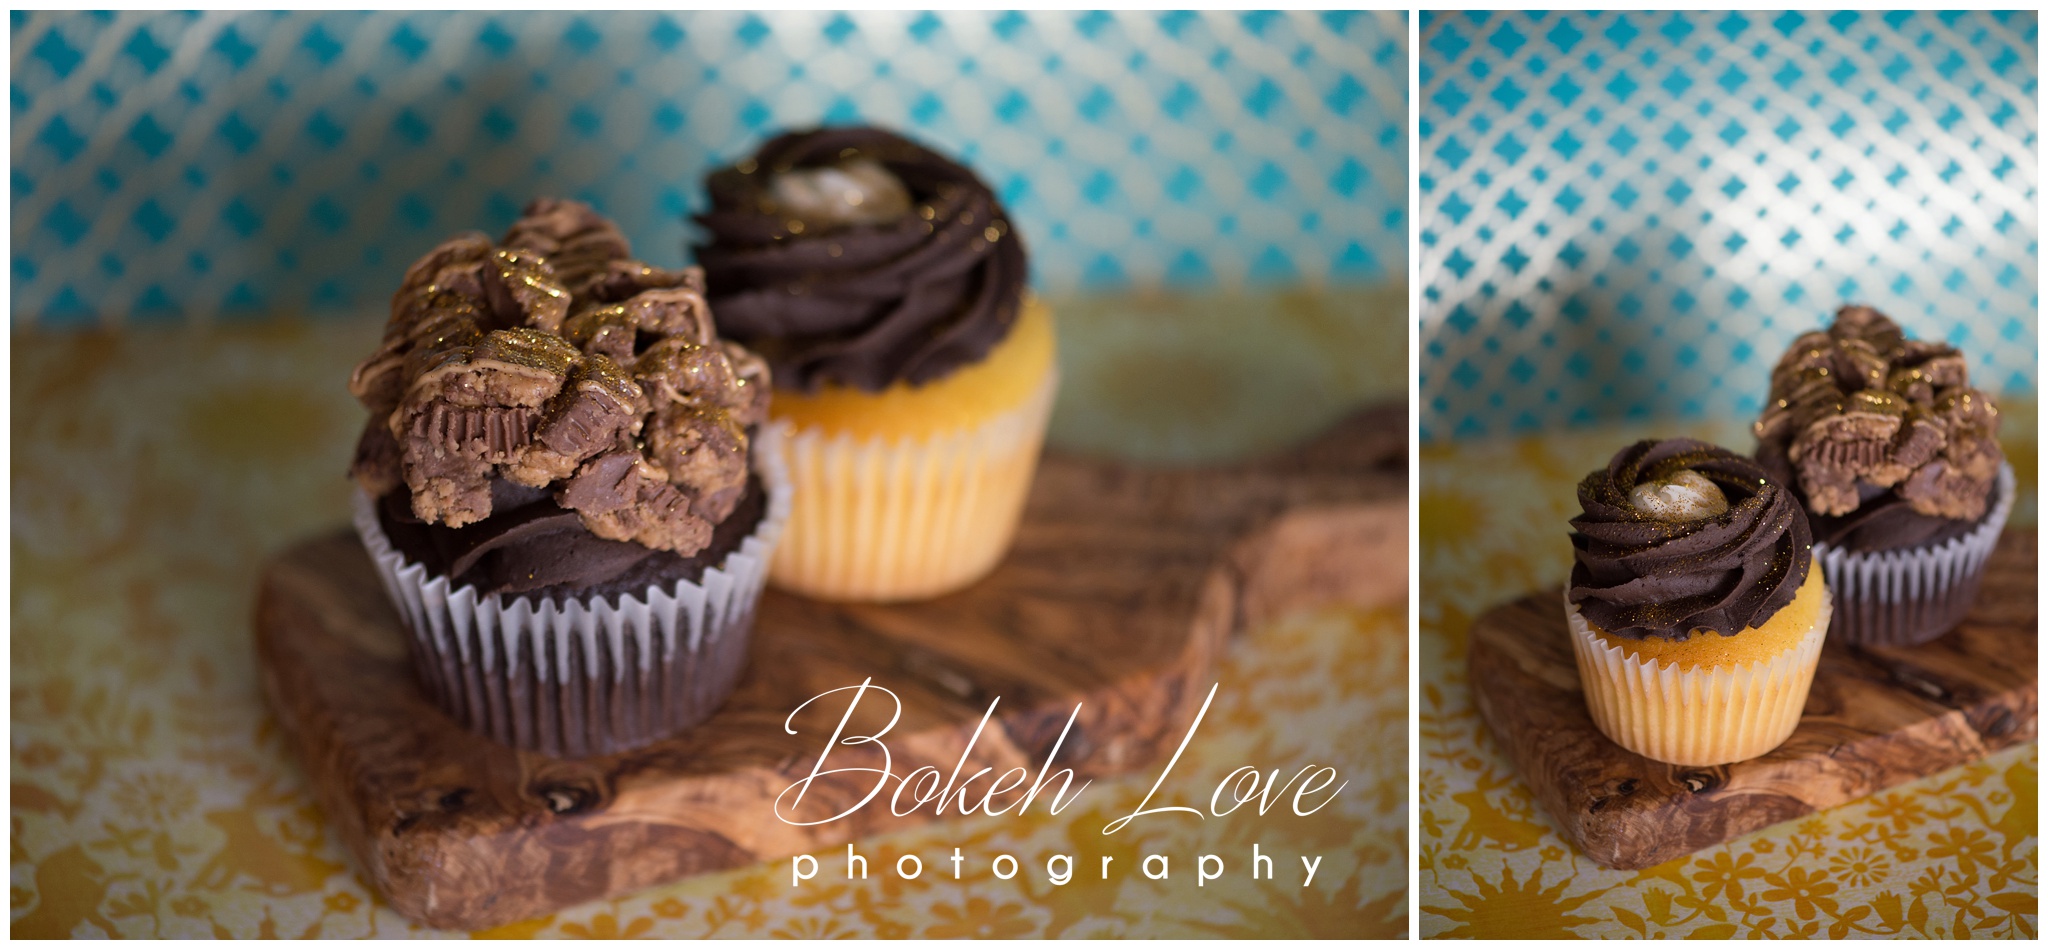 Product photography for local businesses, simple sweet cupcakes, egg harbor city photographer, galloway photographer, absecon photographer, atlantic city photographer, philly photographer, product photography, nj product photography, nj product photographer, new jersey photographer, new jersey business photographer, south jersey photographer, south jersey product photographer, south jersey business photographer, cupcakes, cupcake photos, website photography, business photography, bokeh love photography